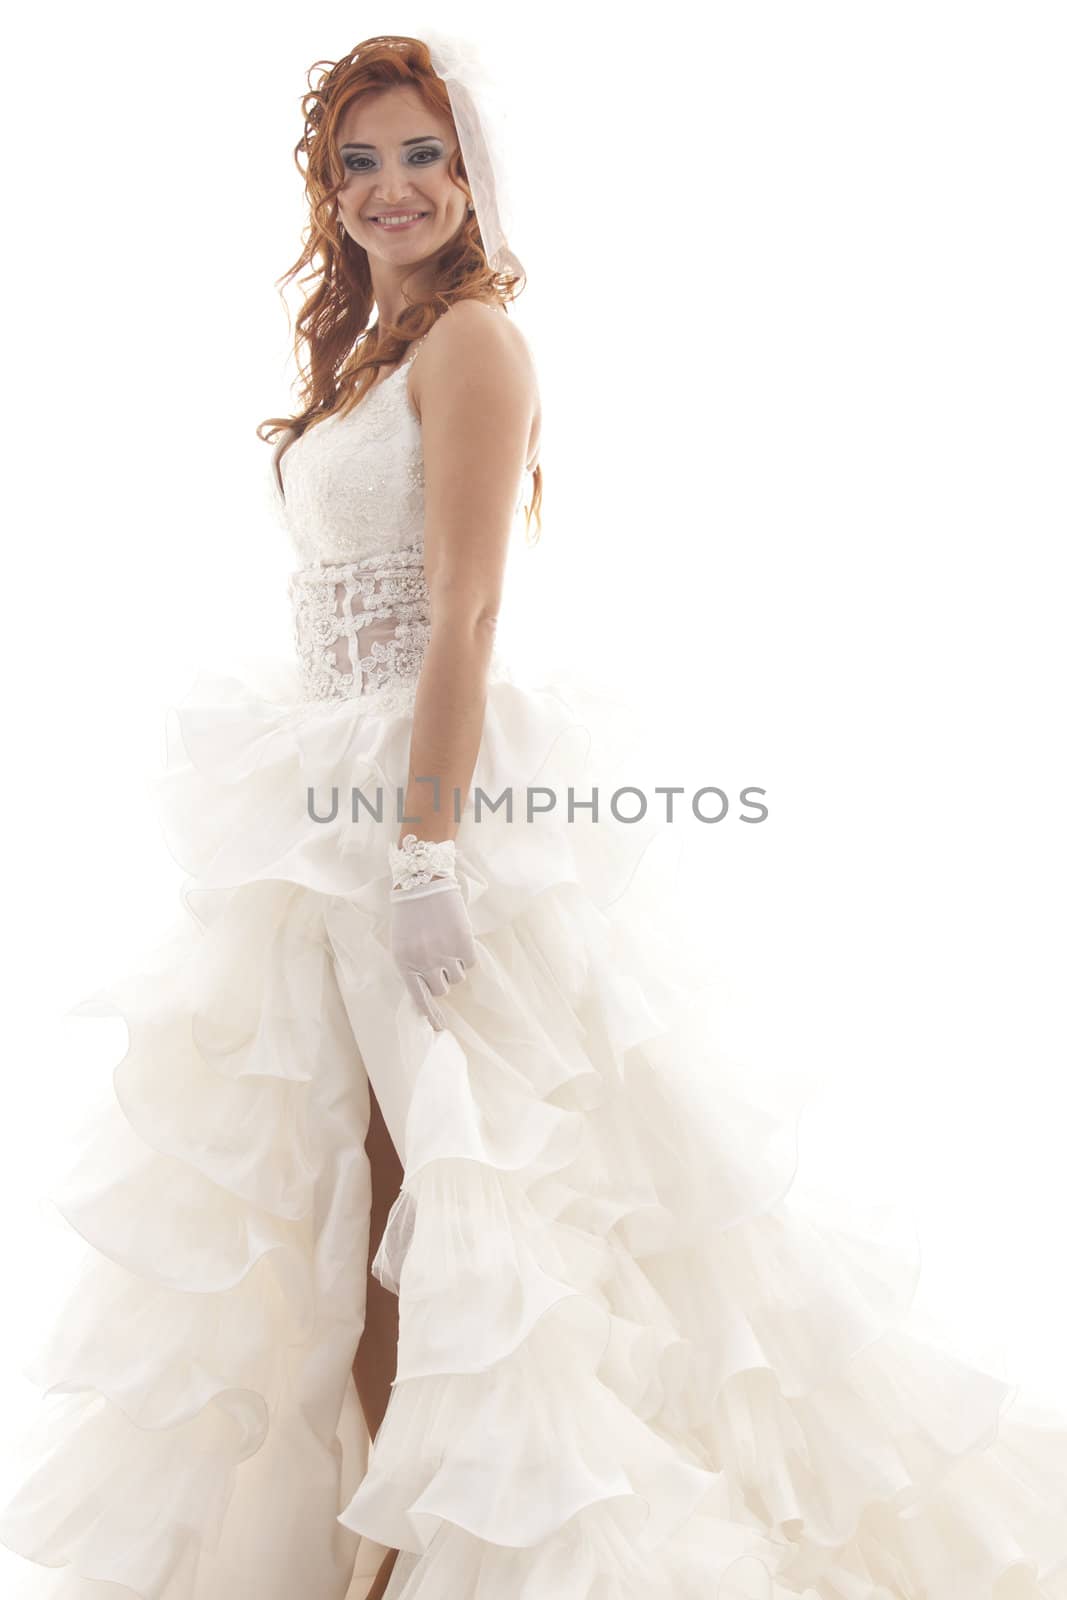 Portrait of young beautiful smiling bride over white background